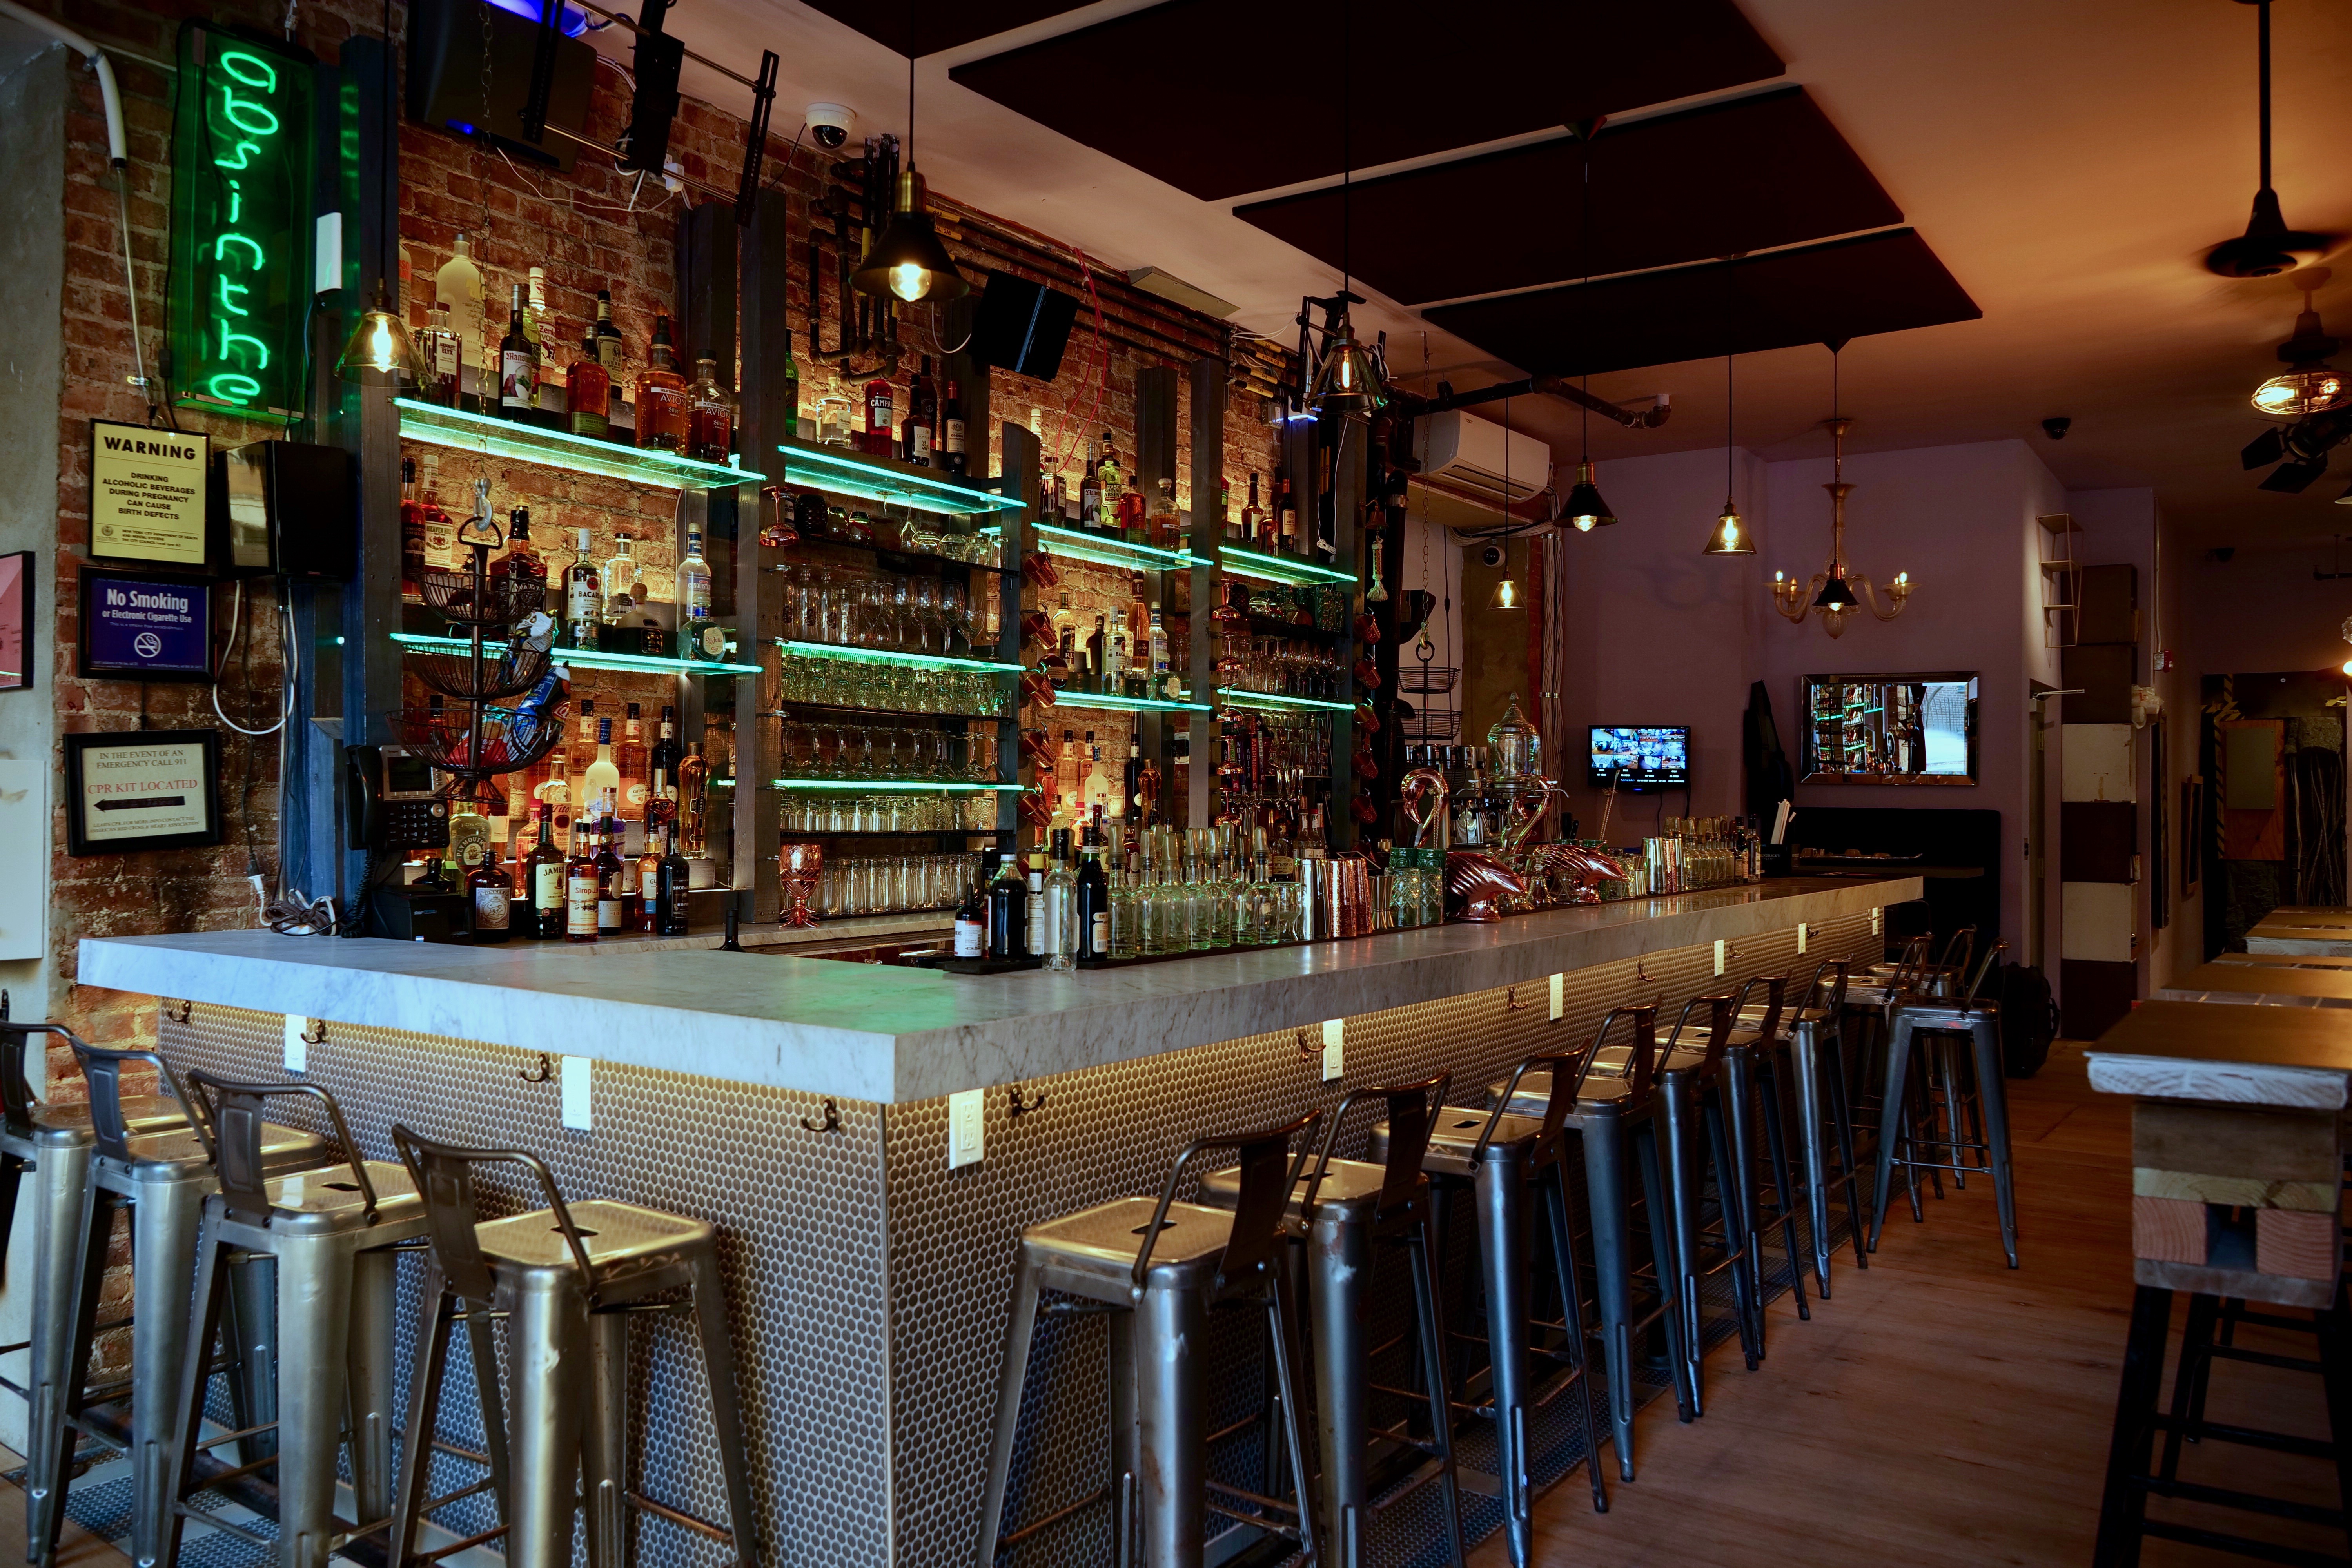 An interior restaurant photo focusing on a backlit bar with alcohol lining the shelves and backless stools set up around the outer perimeter of the bar